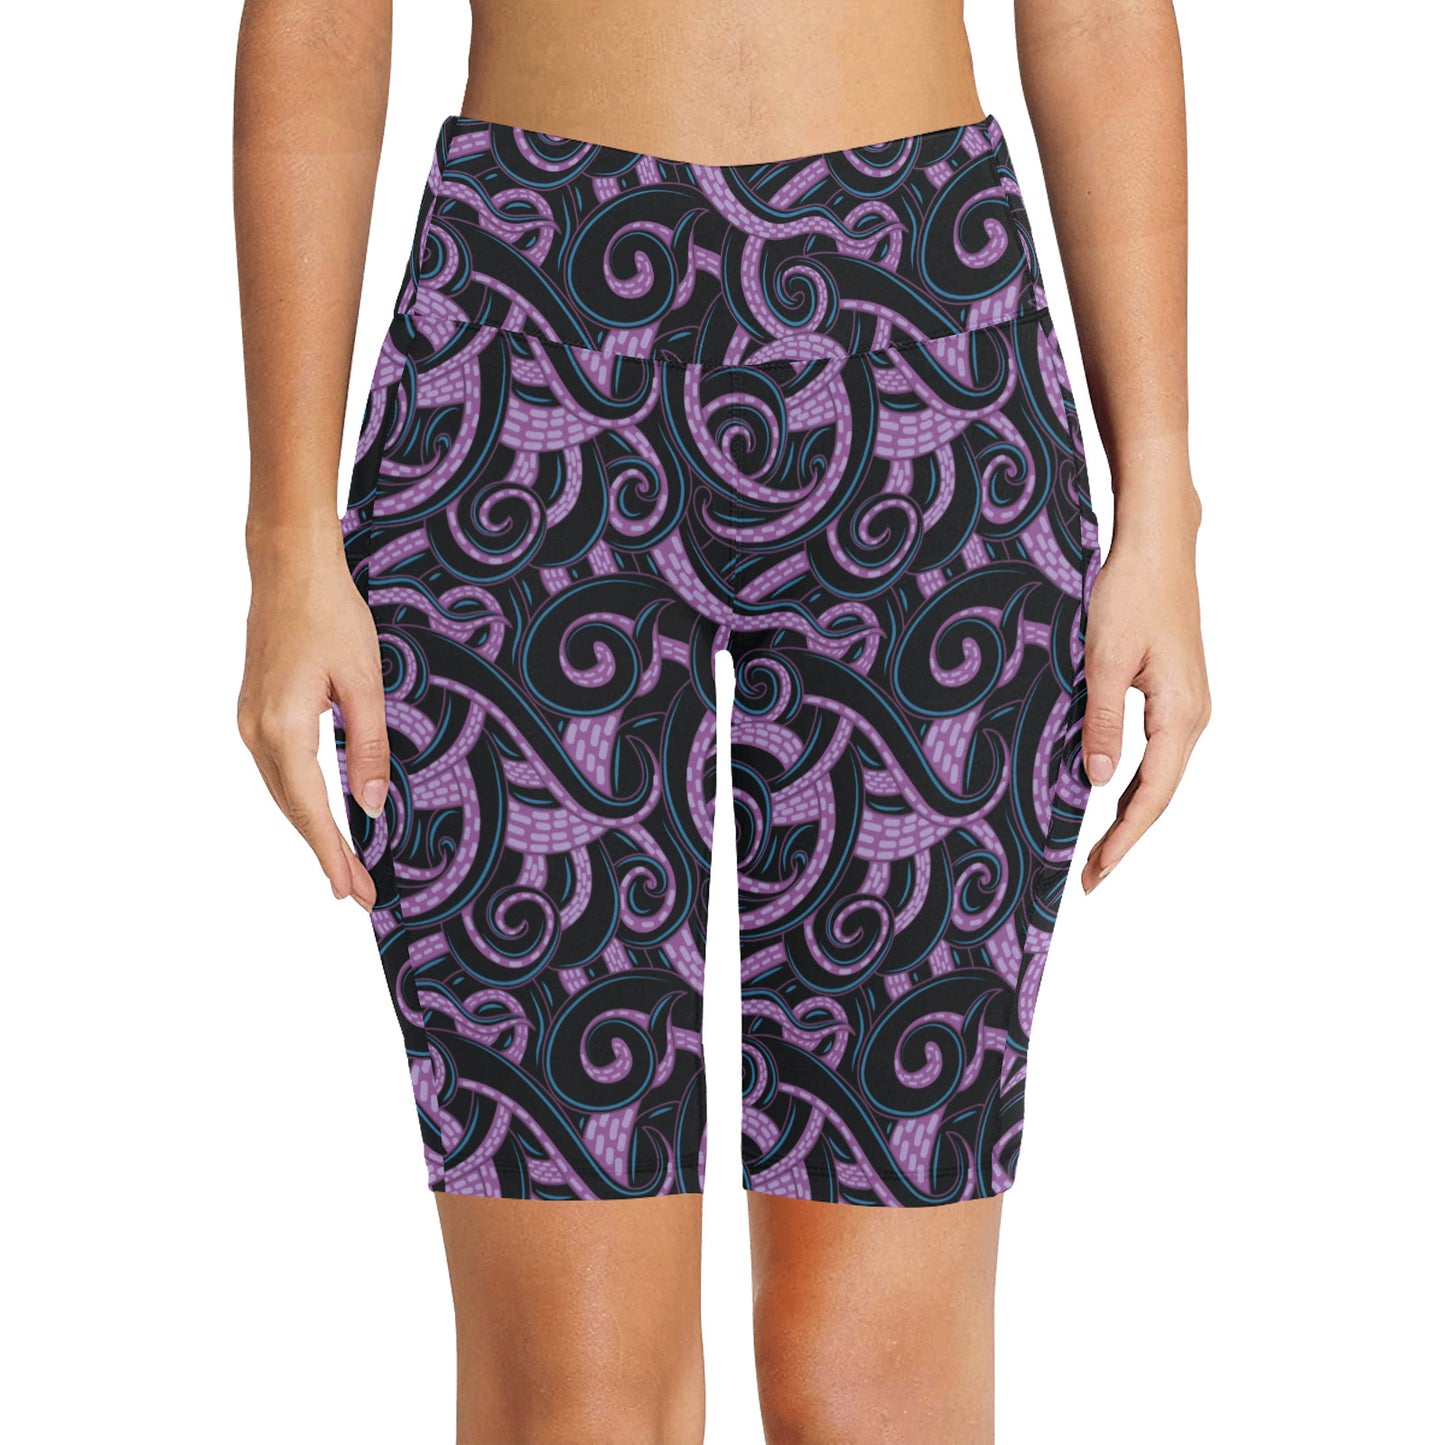 Ursula Tentacles Women's Athletic Workout Half Tights Leggings With Side Pockets